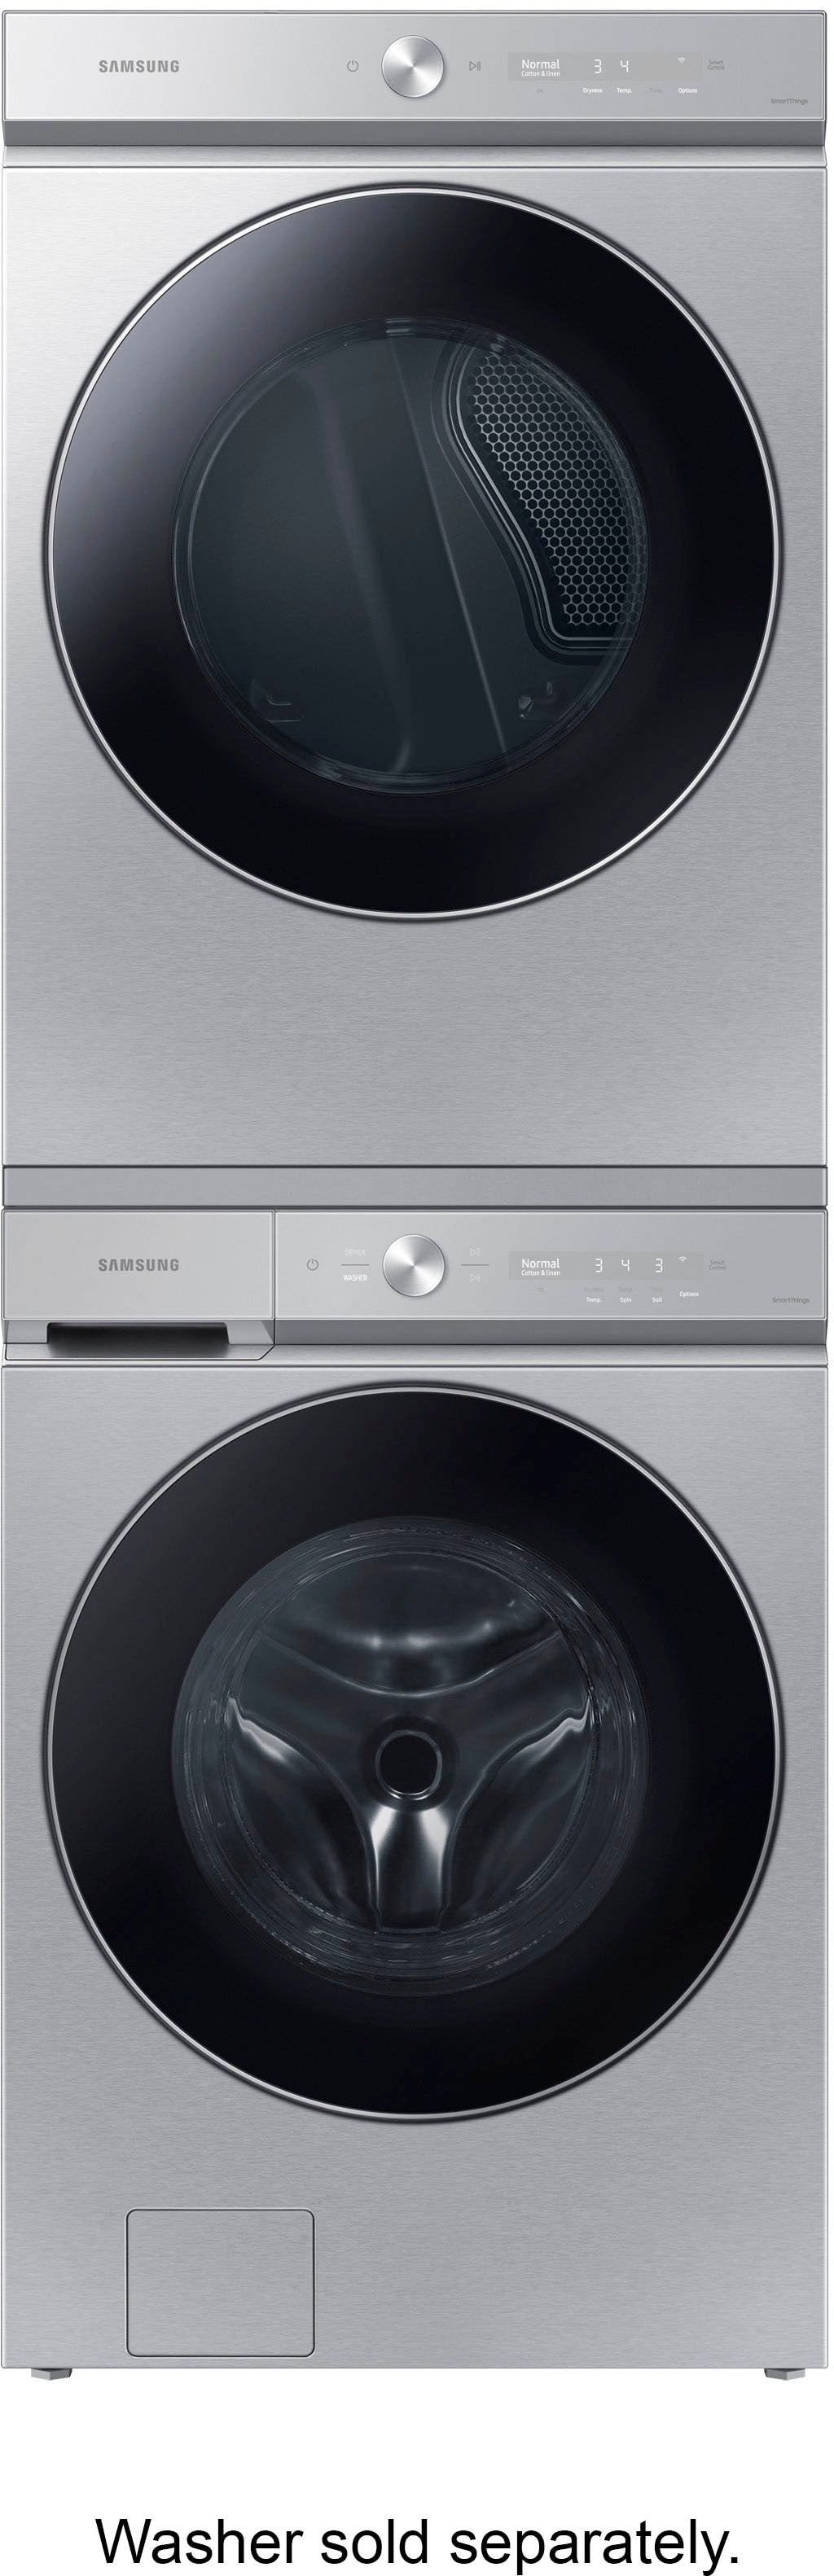 Samsung - Bespoke 7.6 cu. ft. Ultra Capacity Electric Dryer with AI Optimal Dry and Super Speed Dry - Silver steel_11